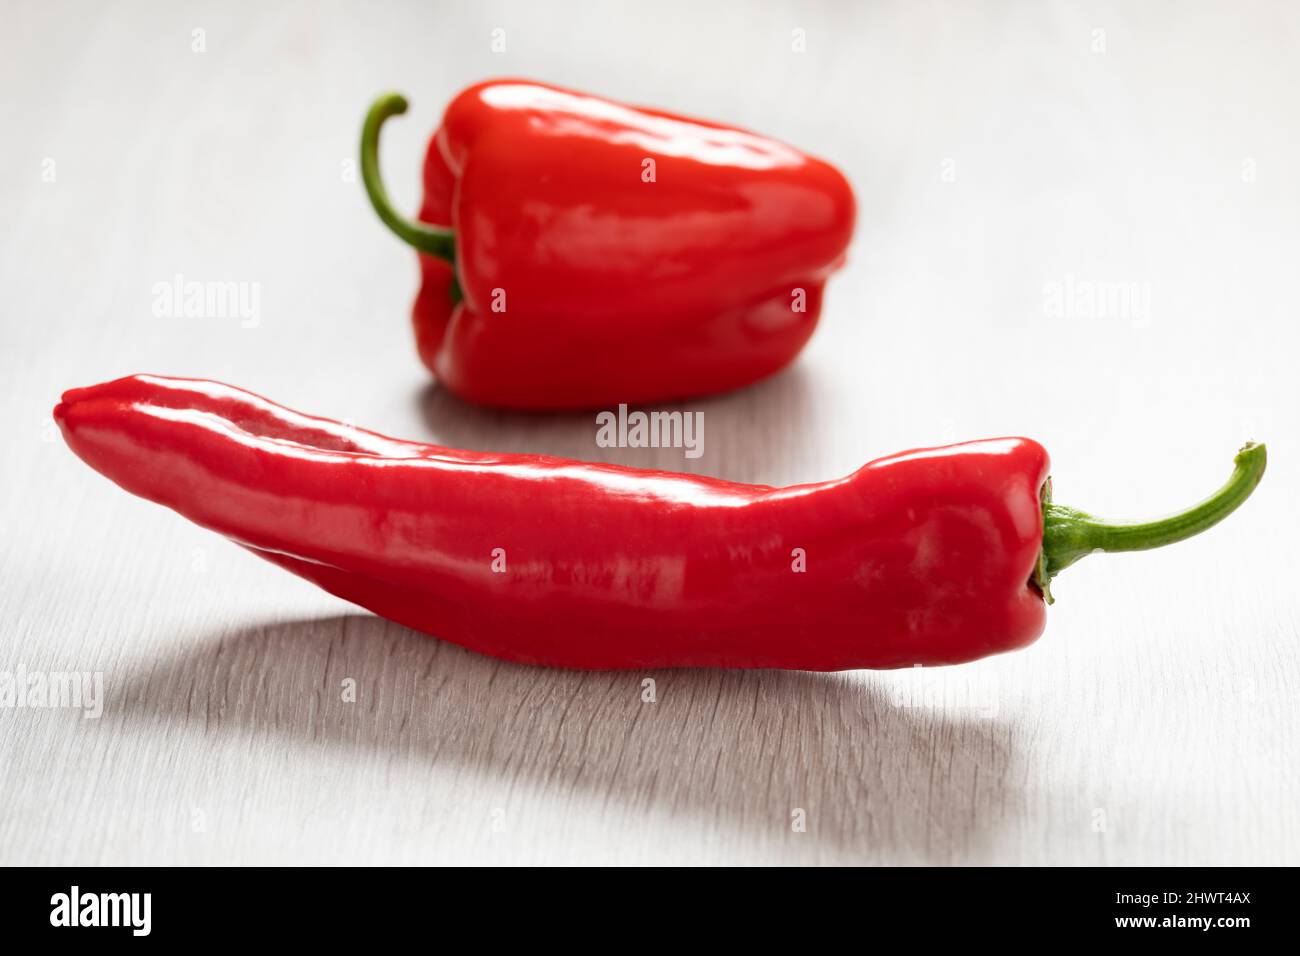 Fresh sweet raw red bell pepper and pointed bell pepper close up Stock Photo